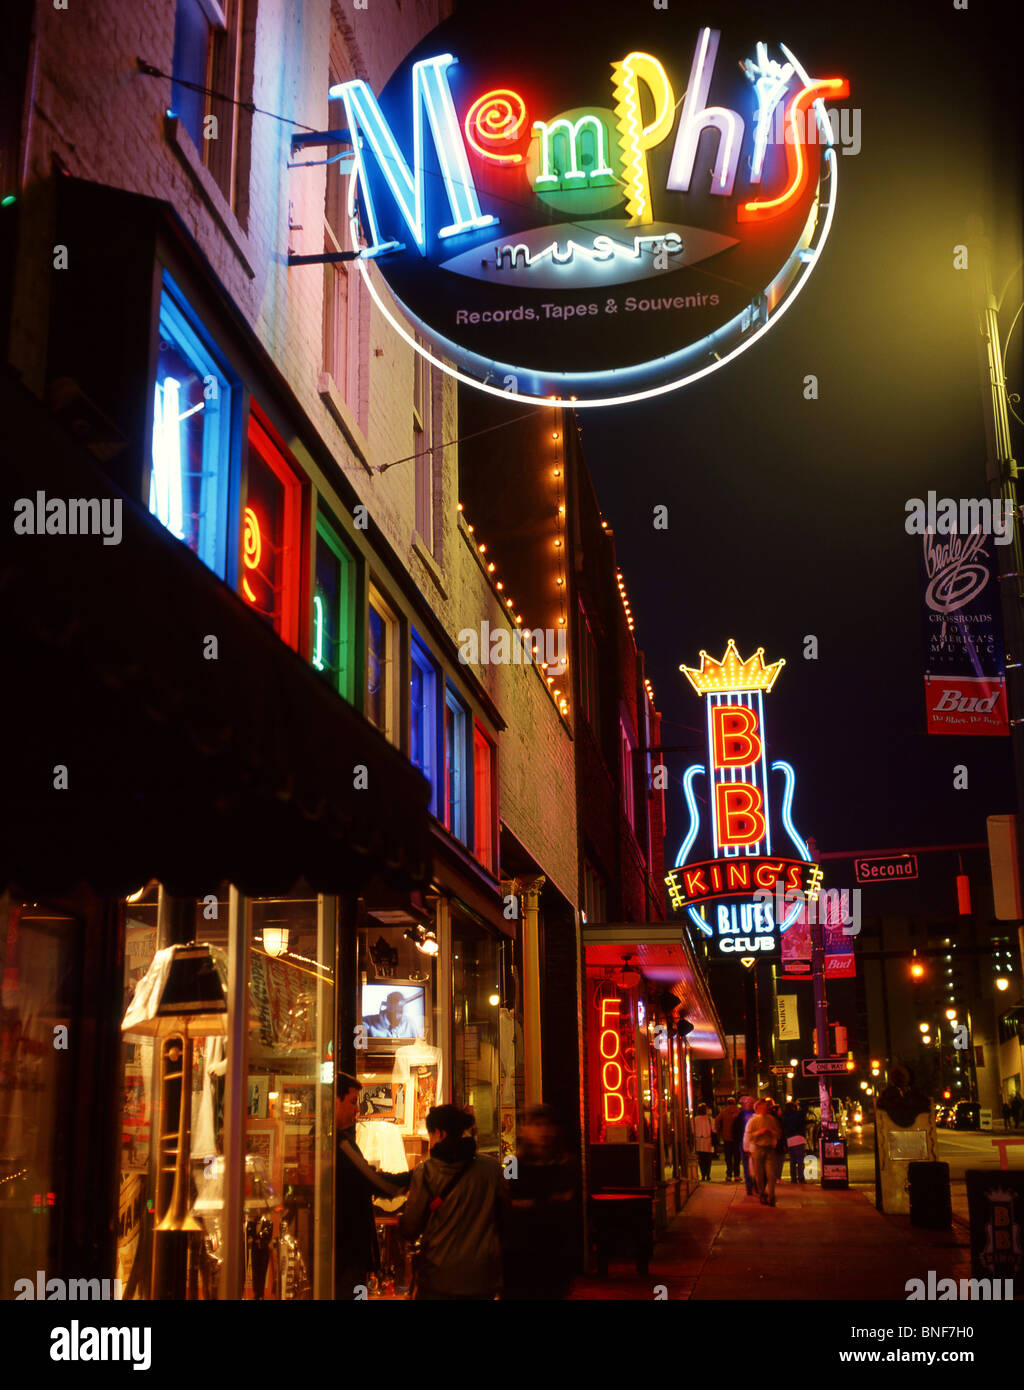 Beale Street at night, Beale Street District, Memphis, Tennessee, United States of America Stock Photo